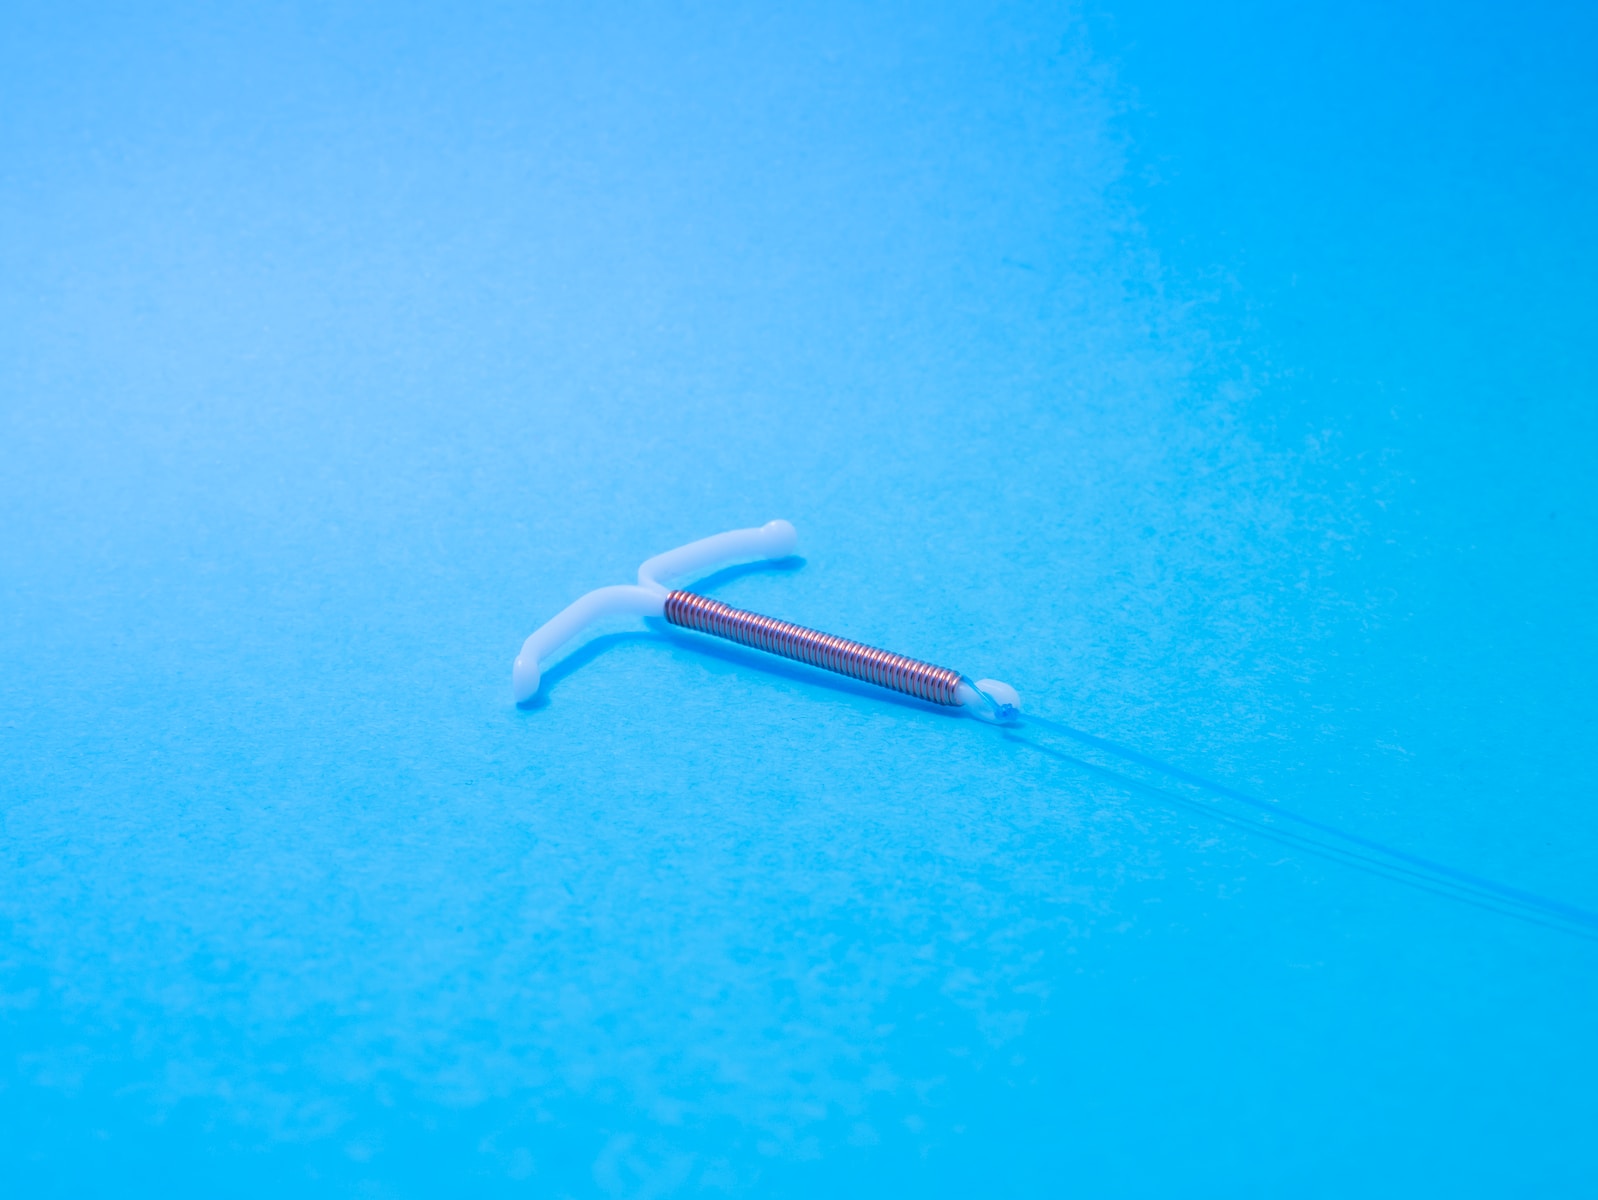 a toothbrush with a toothpaste stuck in it